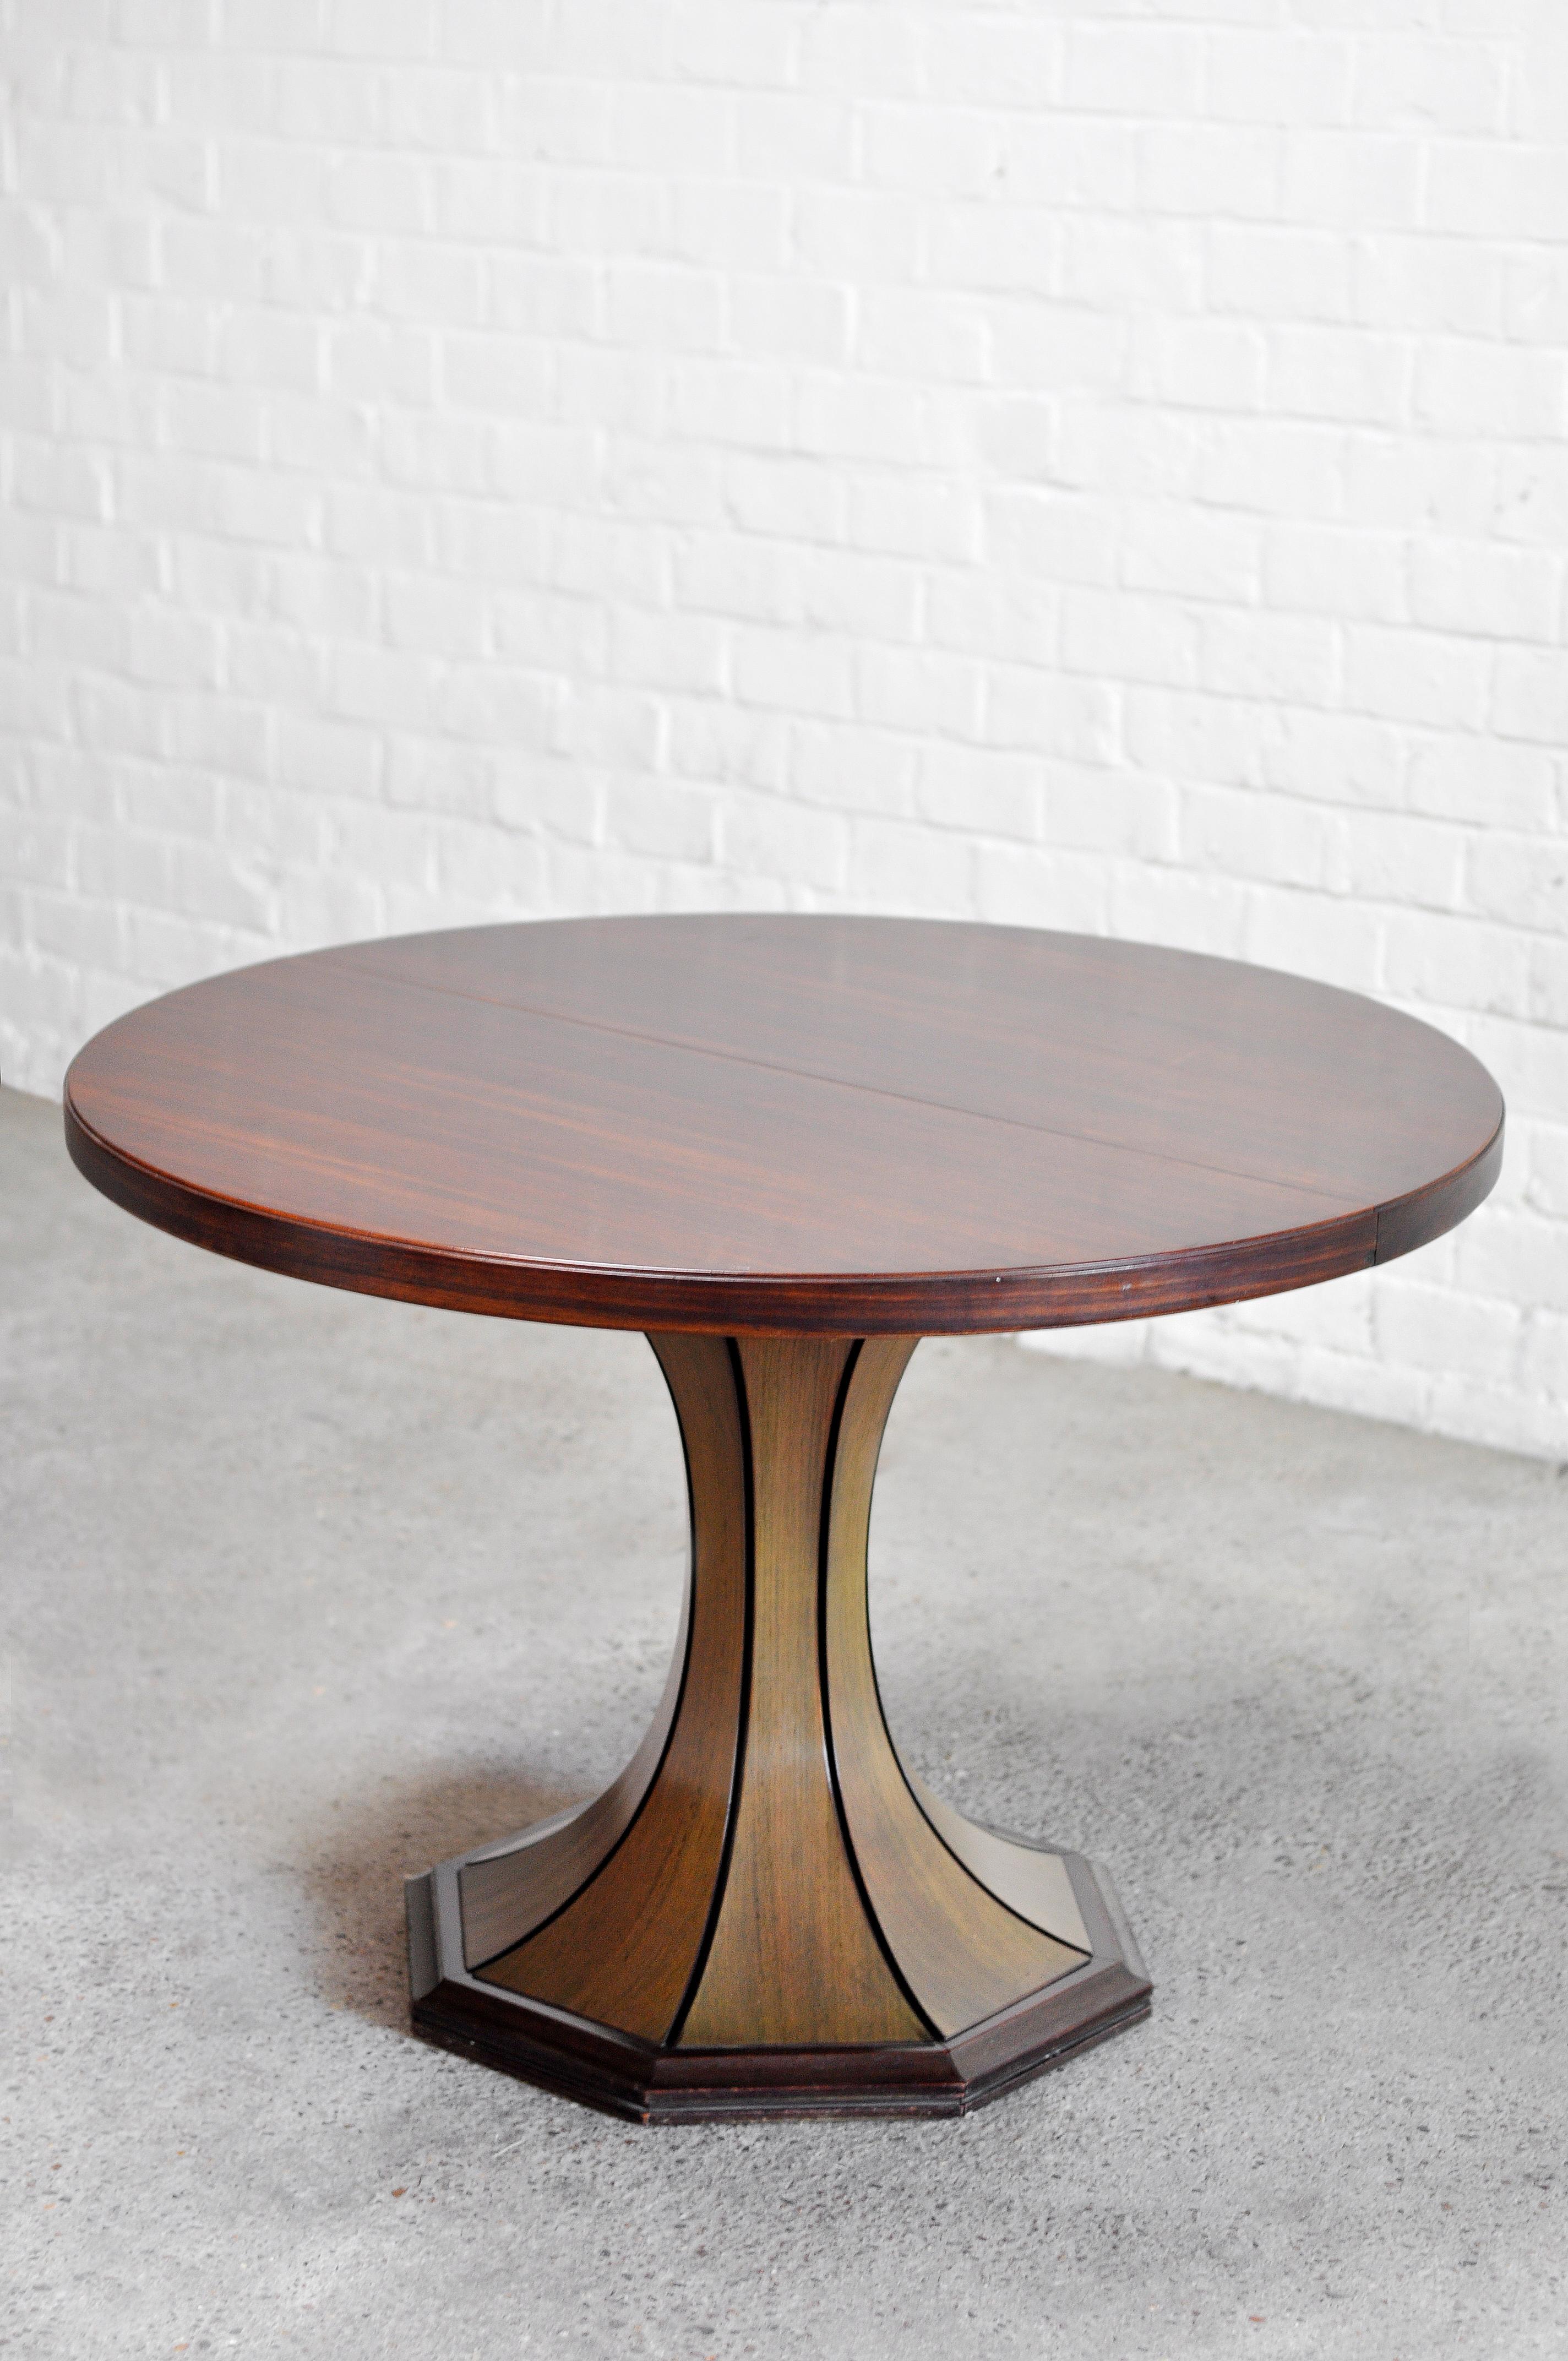 A wonderful Italian round dining table from the 1960s, attributed to Italian designer Carlo De Carli. It features a round mahagony wooden top resting on a sculptural hexagonal base. Amazing grain and shine to the wood. This table is extendable with